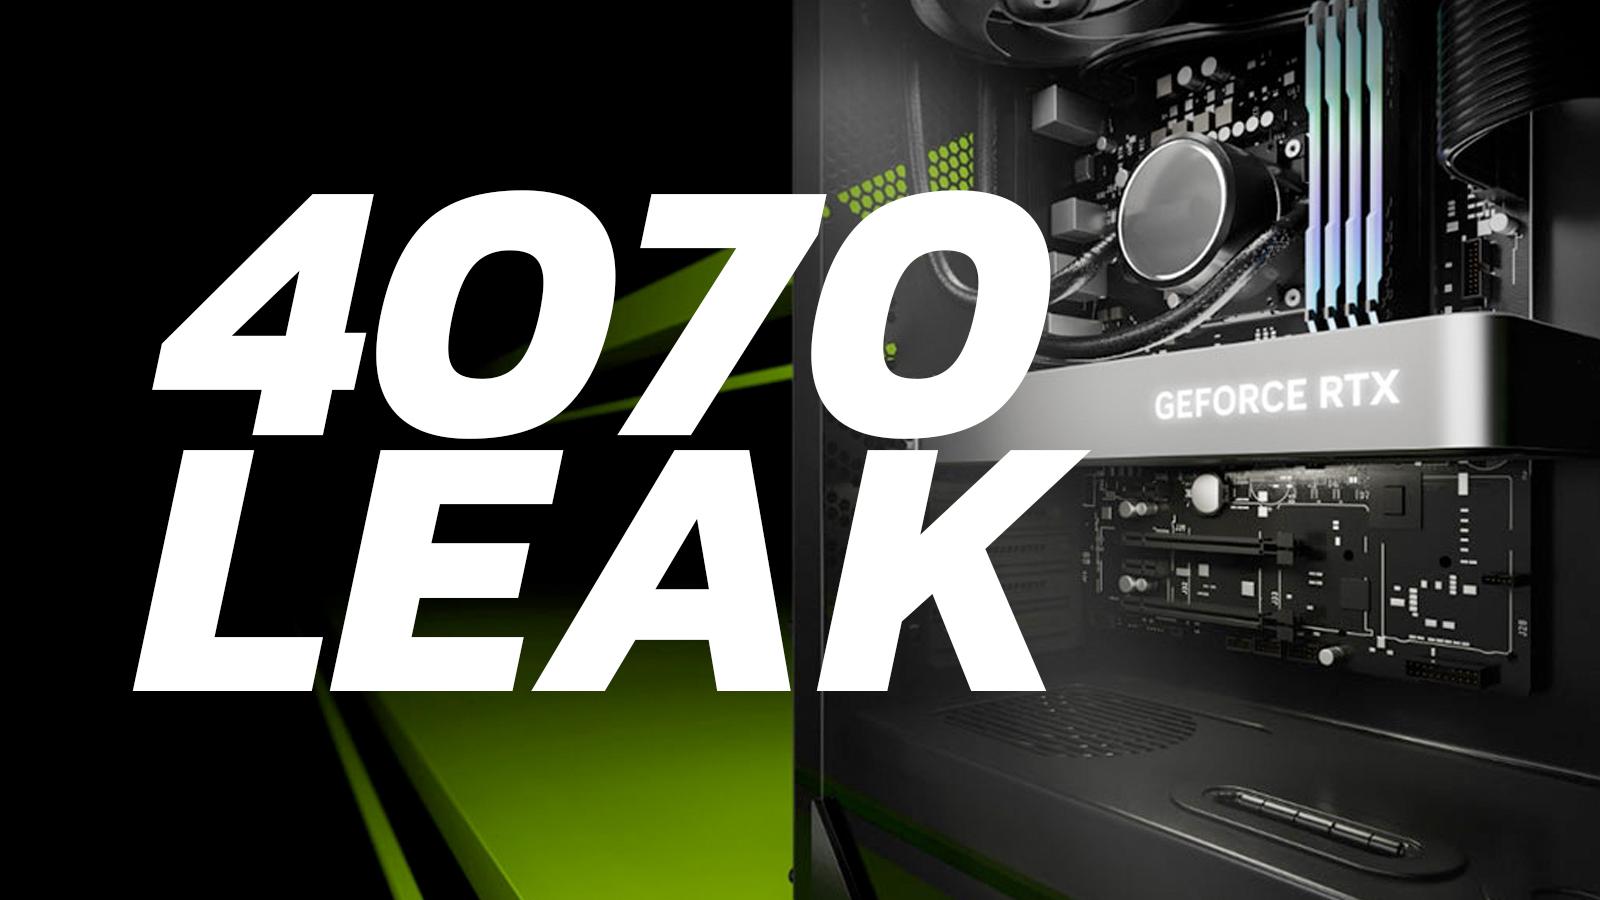 Will the GeForce RTX 4070 be cheaper? NVIDIA supports board partners with a  significant rebate